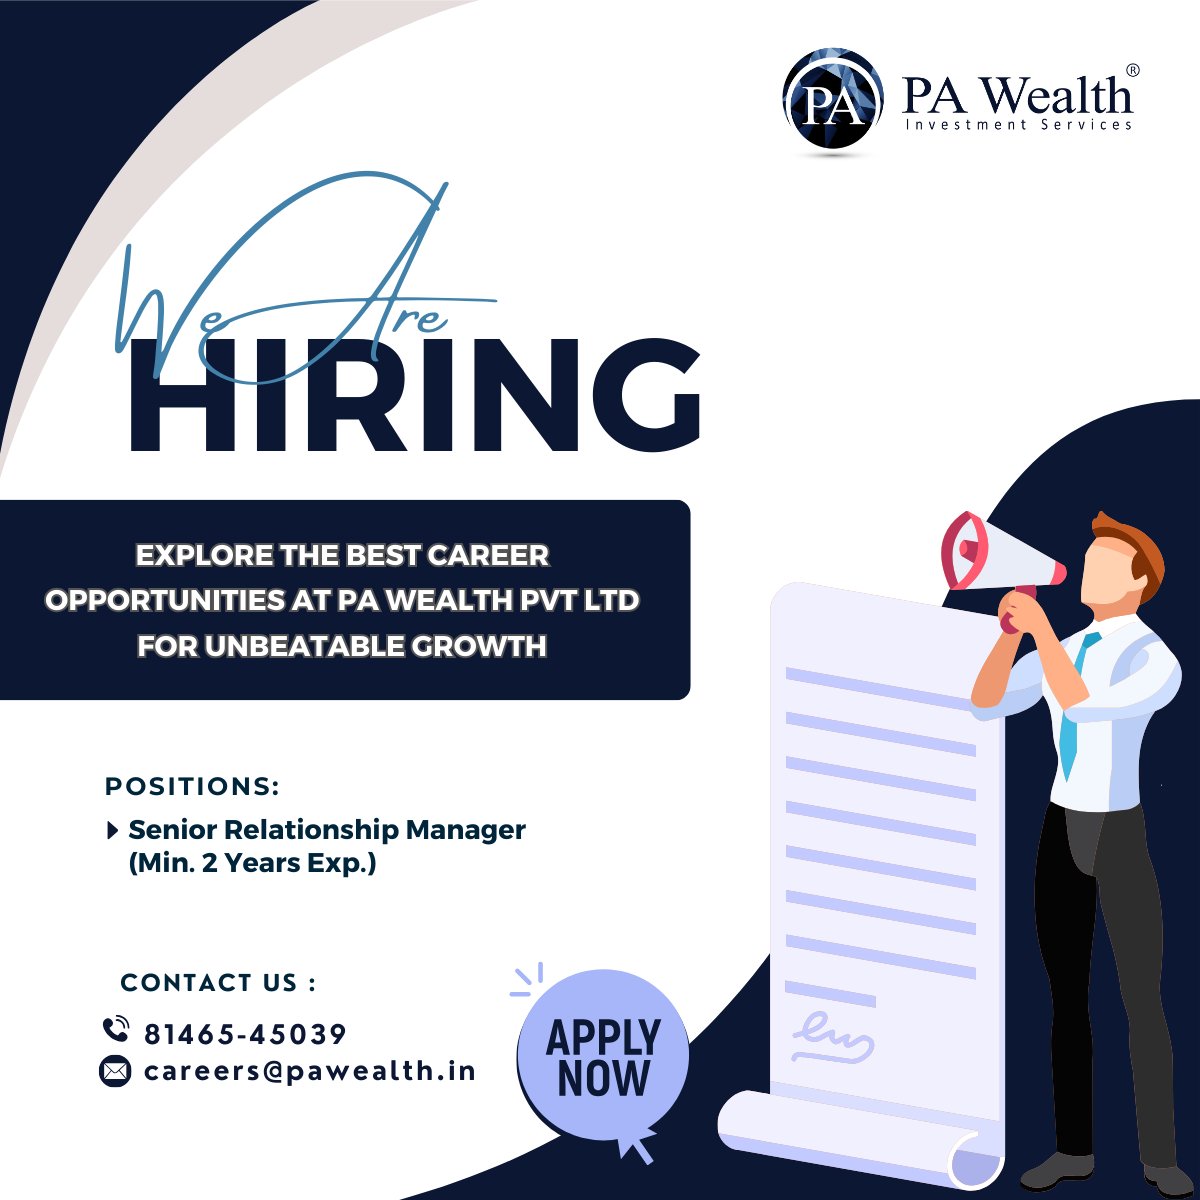 Join a collaborative team of dedicated professionals at PA Wealth! 

We're looking for individuals who are driven, adaptable, and passionate about teamwork to join our diverse and growing team.

#EmploymentOpportunity #JobOpportunity #NowHiring #JobOpening #JobAlert #JobSearch